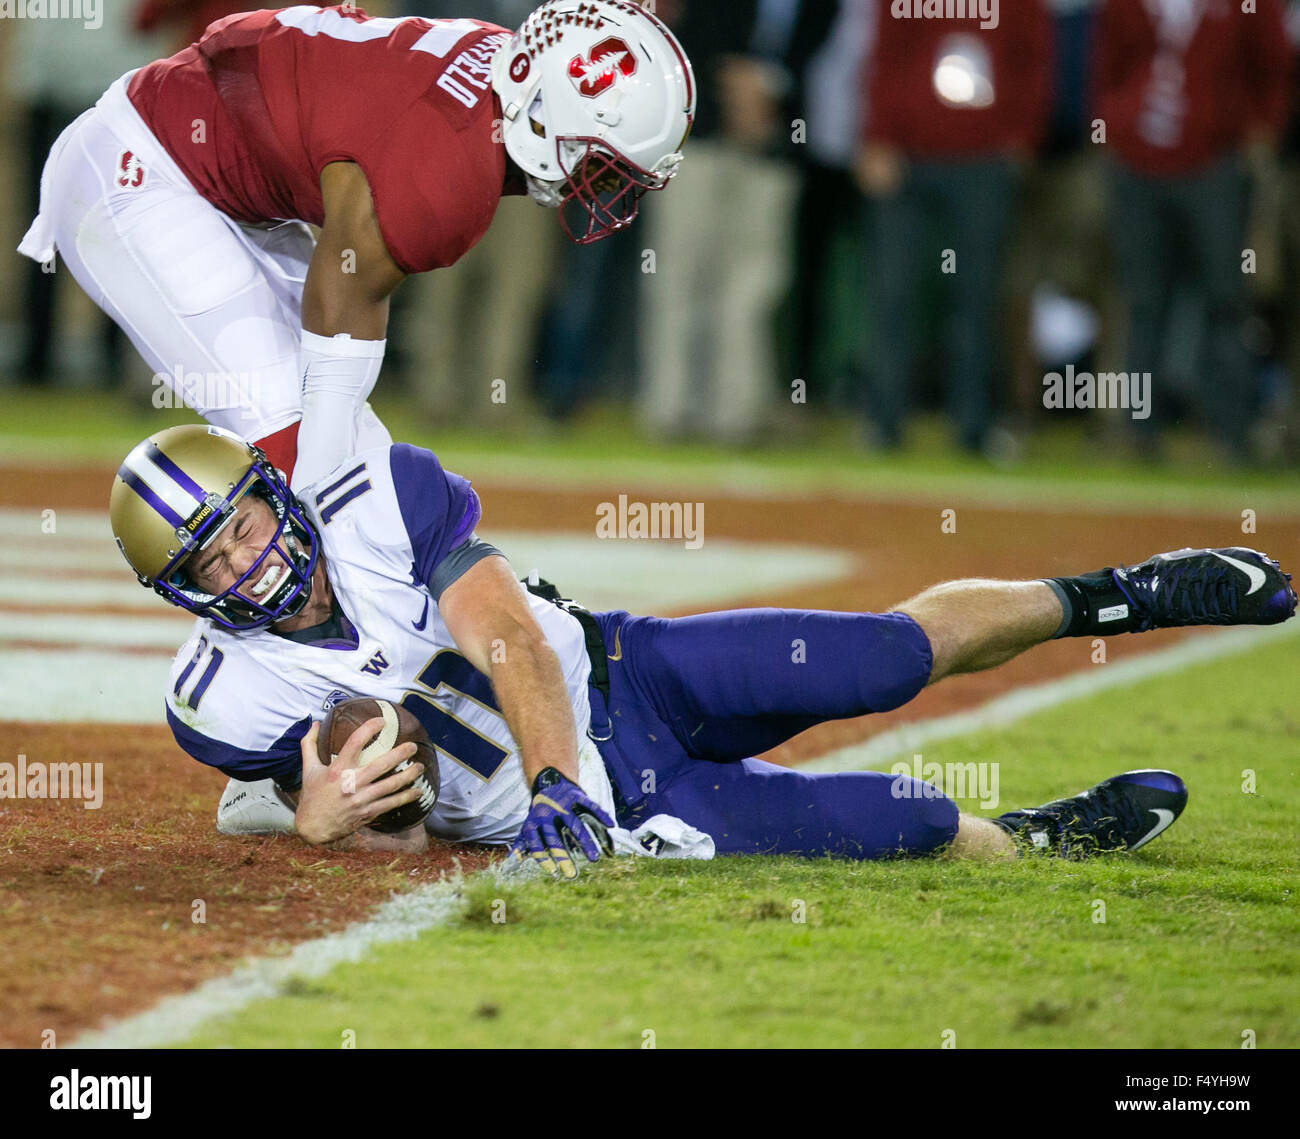 Palo Alto, CA. 24th Oct, 2015. Washington Huskies quarterback K.J. Carta-Samuels (11) dives into the end zone for a touchdown during the NCAA Football game between the Stanford Cardinal and the Washington Huskies at Stanford Stadium in Palo Alto, CA. Stanford defeated Washington 31-14. Damon Tarver/Cal Sport Media/Alamy Live News Stock Photo